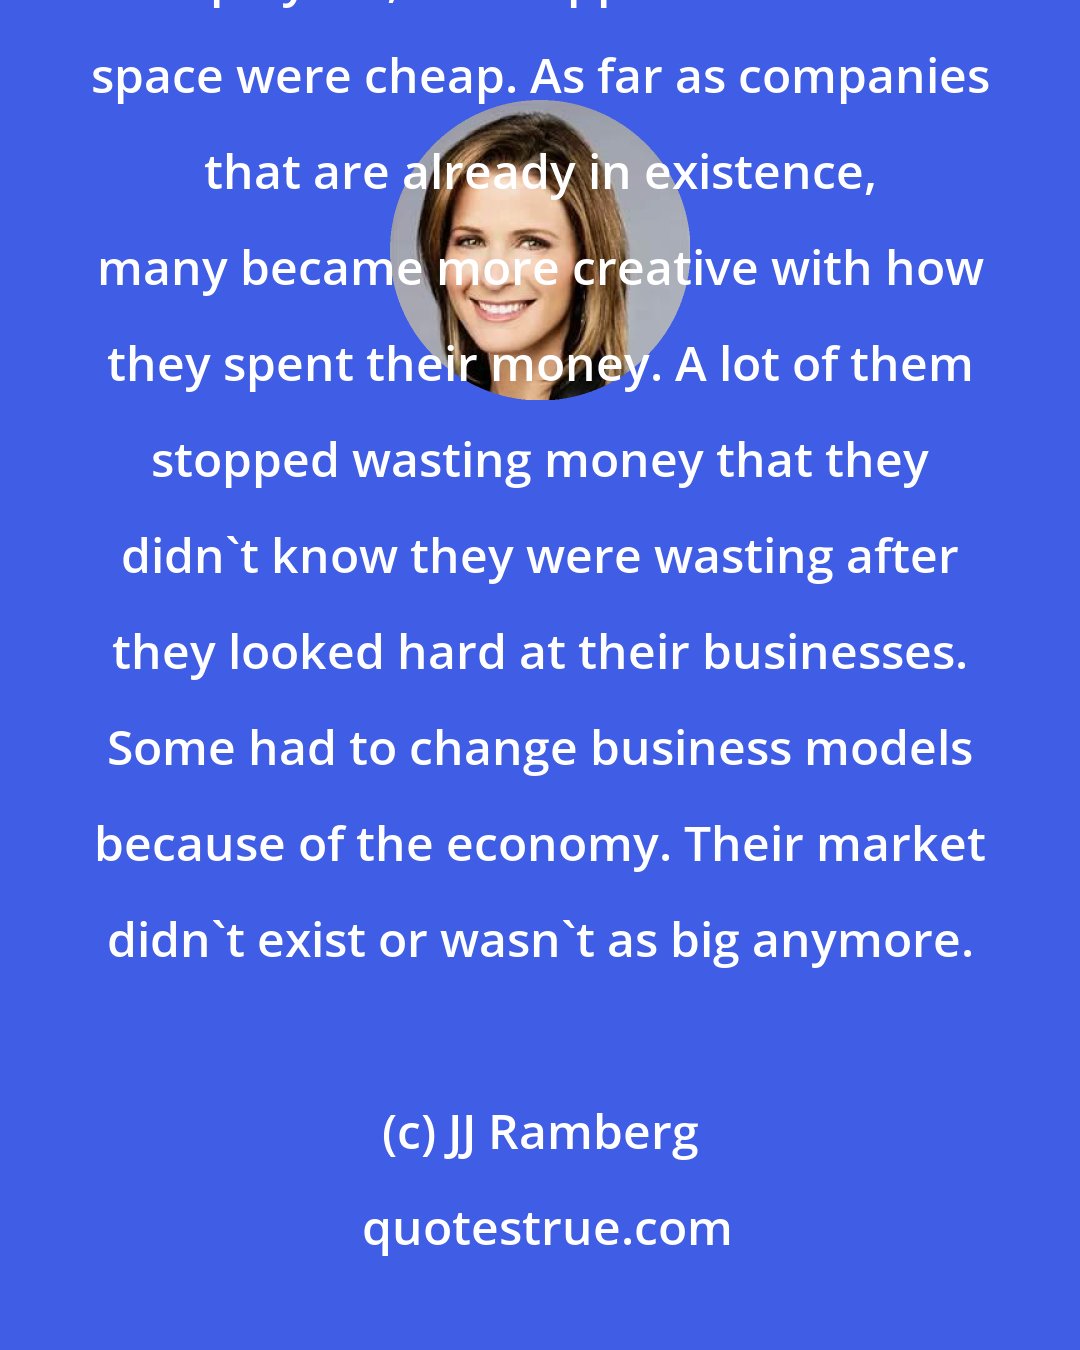 JJ Ramberg: I talked with people starting up in the middle of the recession and employees, and supplies and office space were cheap. As far as companies that are already in existence, many became more creative with how they spent their money. A lot of them stopped wasting money that they didn't know they were wasting after they looked hard at their businesses. Some had to change business models because of the economy. Their market didn't exist or wasn't as big anymore.